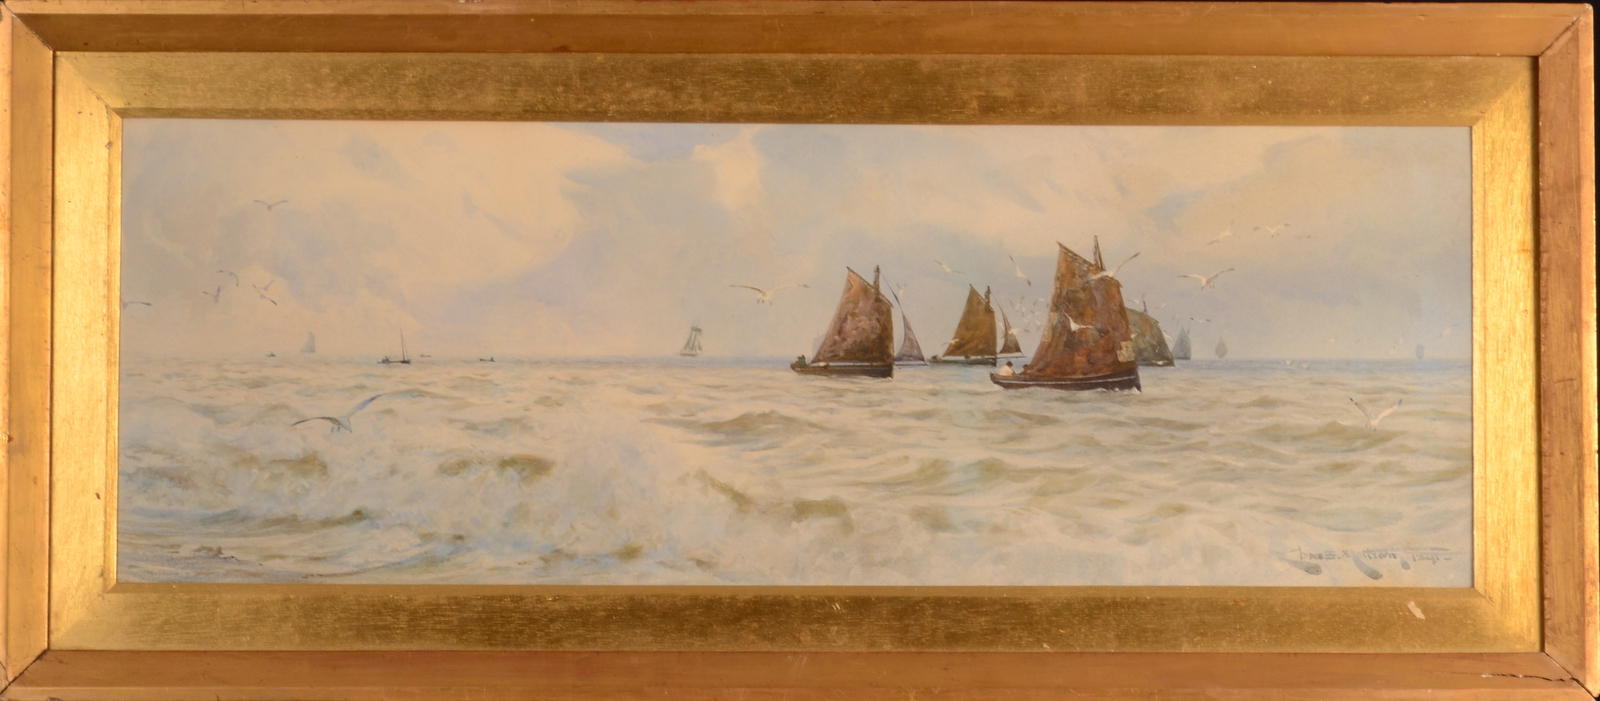 CHARLES MOTTRAM The Fishing Fleet Watercolour Signed and dated 1841 28 x 82cm - Image 2 of 2